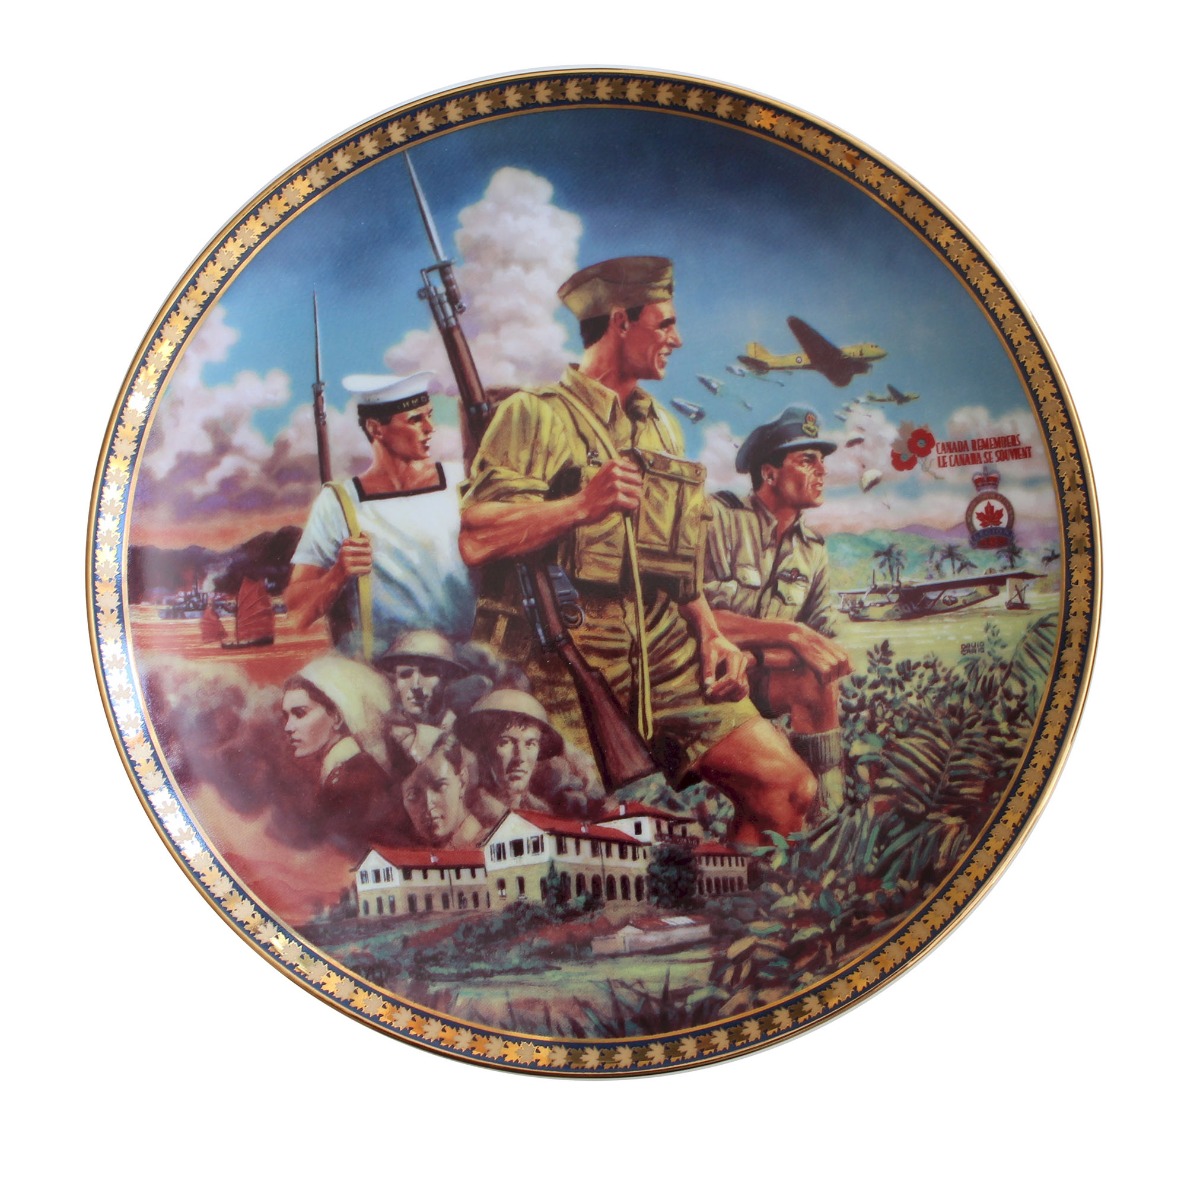 CANADA REMEMBERS - THY BROAD DOMAIN - COLLECTOR'S PLATE #9 OF 10  